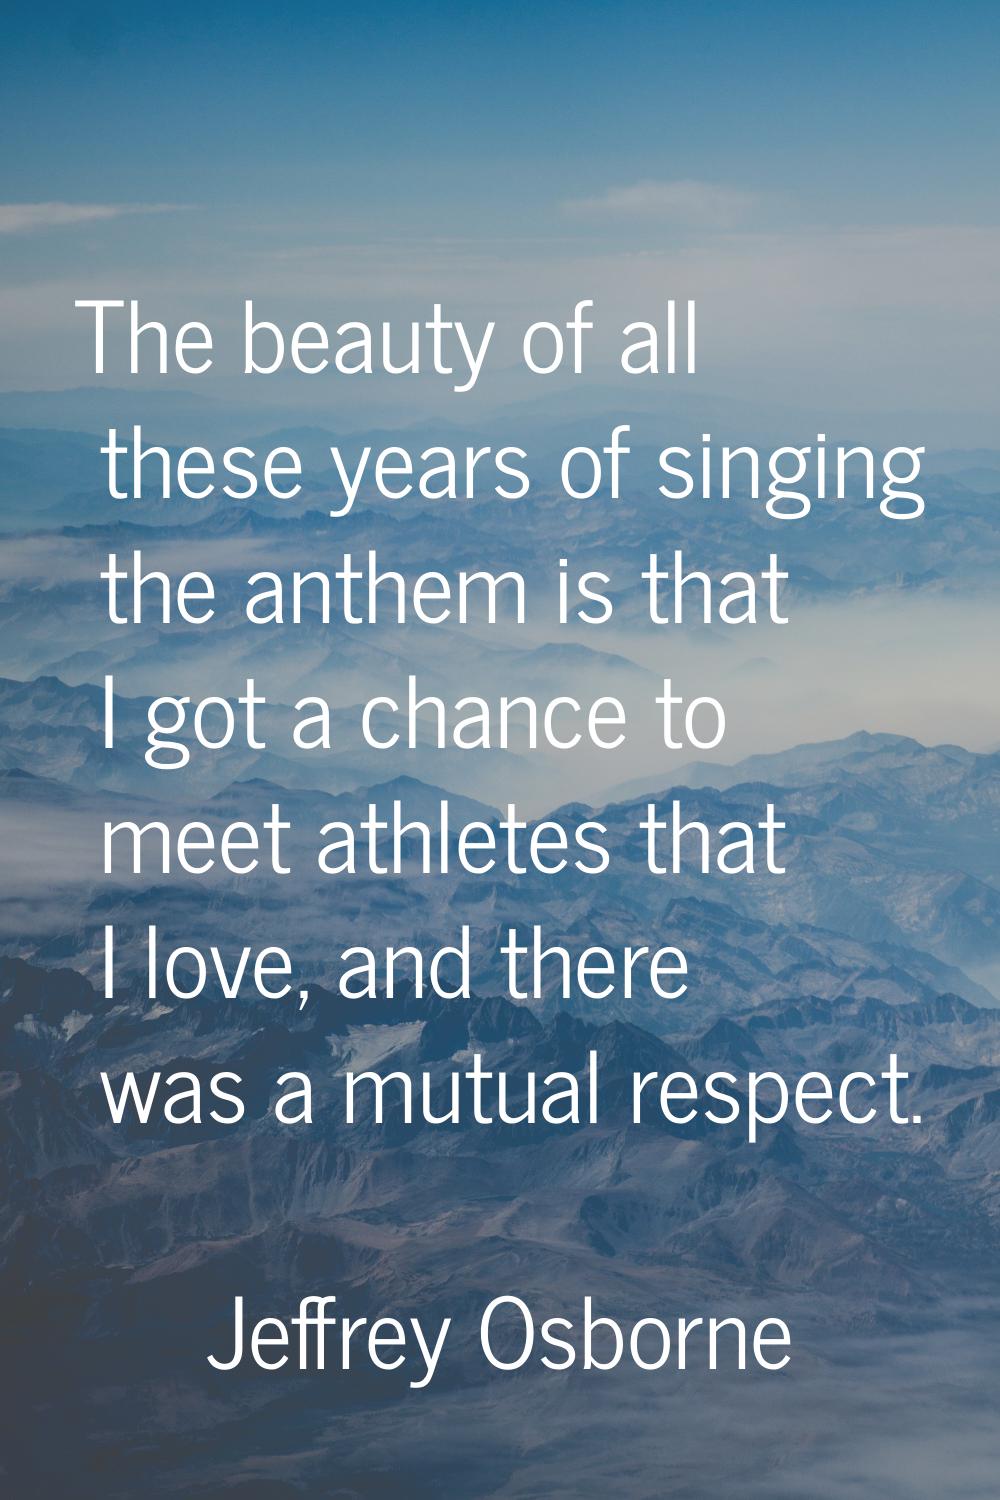 The beauty of all these years of singing the anthem is that I got a chance to meet athletes that I 